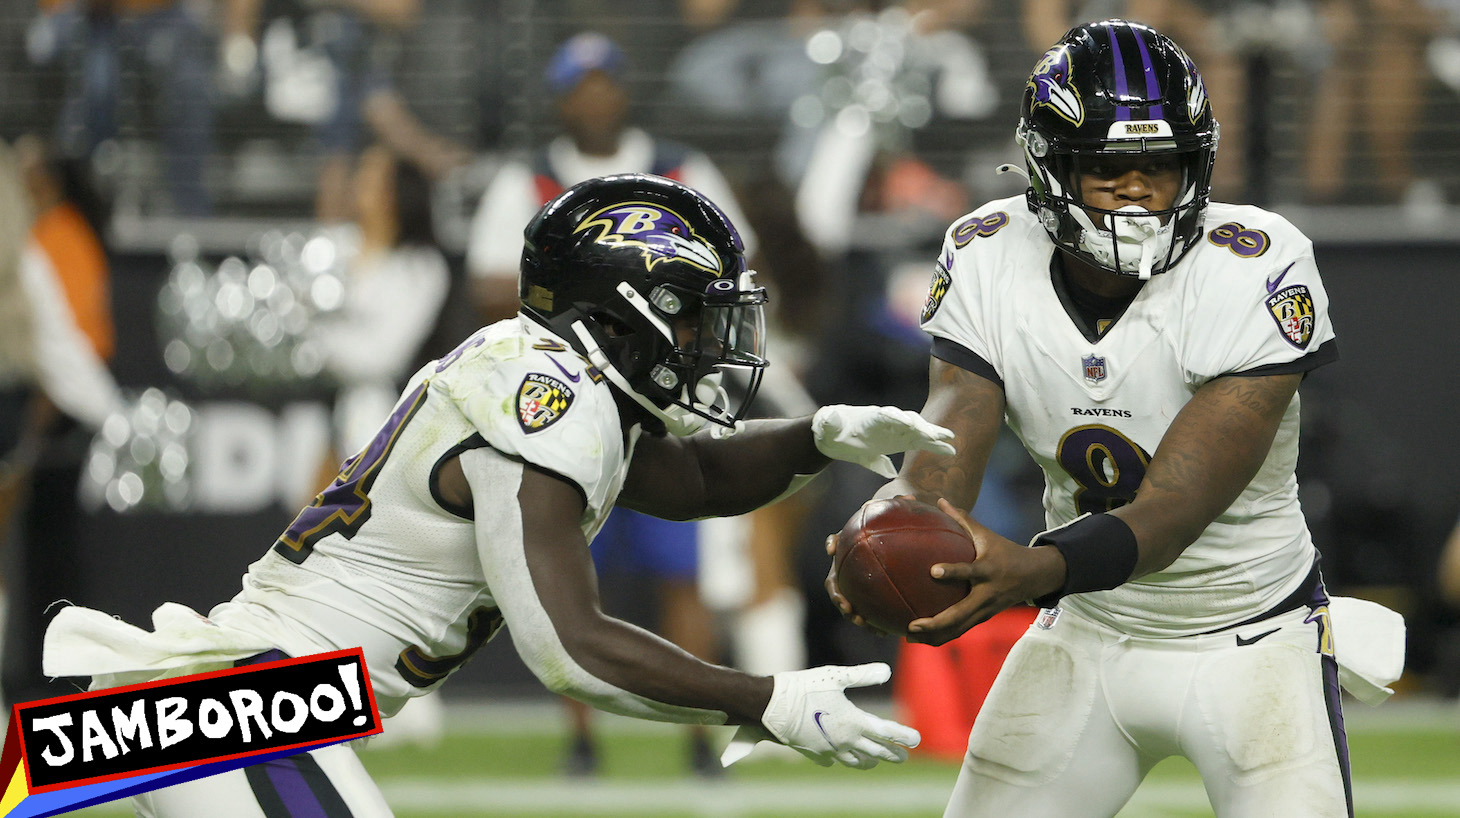 LAS VEGAS, NEVADA - SEPTEMBER 13: Lamar Jackson #8 of the Baltimore Ravens fakes a handoff to running back Ty'Son Williams #34 against the Las Vegas Raiders at Allegiant Stadium on September 13, 2021 in Las Vegas, Nevada. The Raiders defeated the Ravens 33-27 in overtime. (Photo by Ethan Miller/Getty Images)